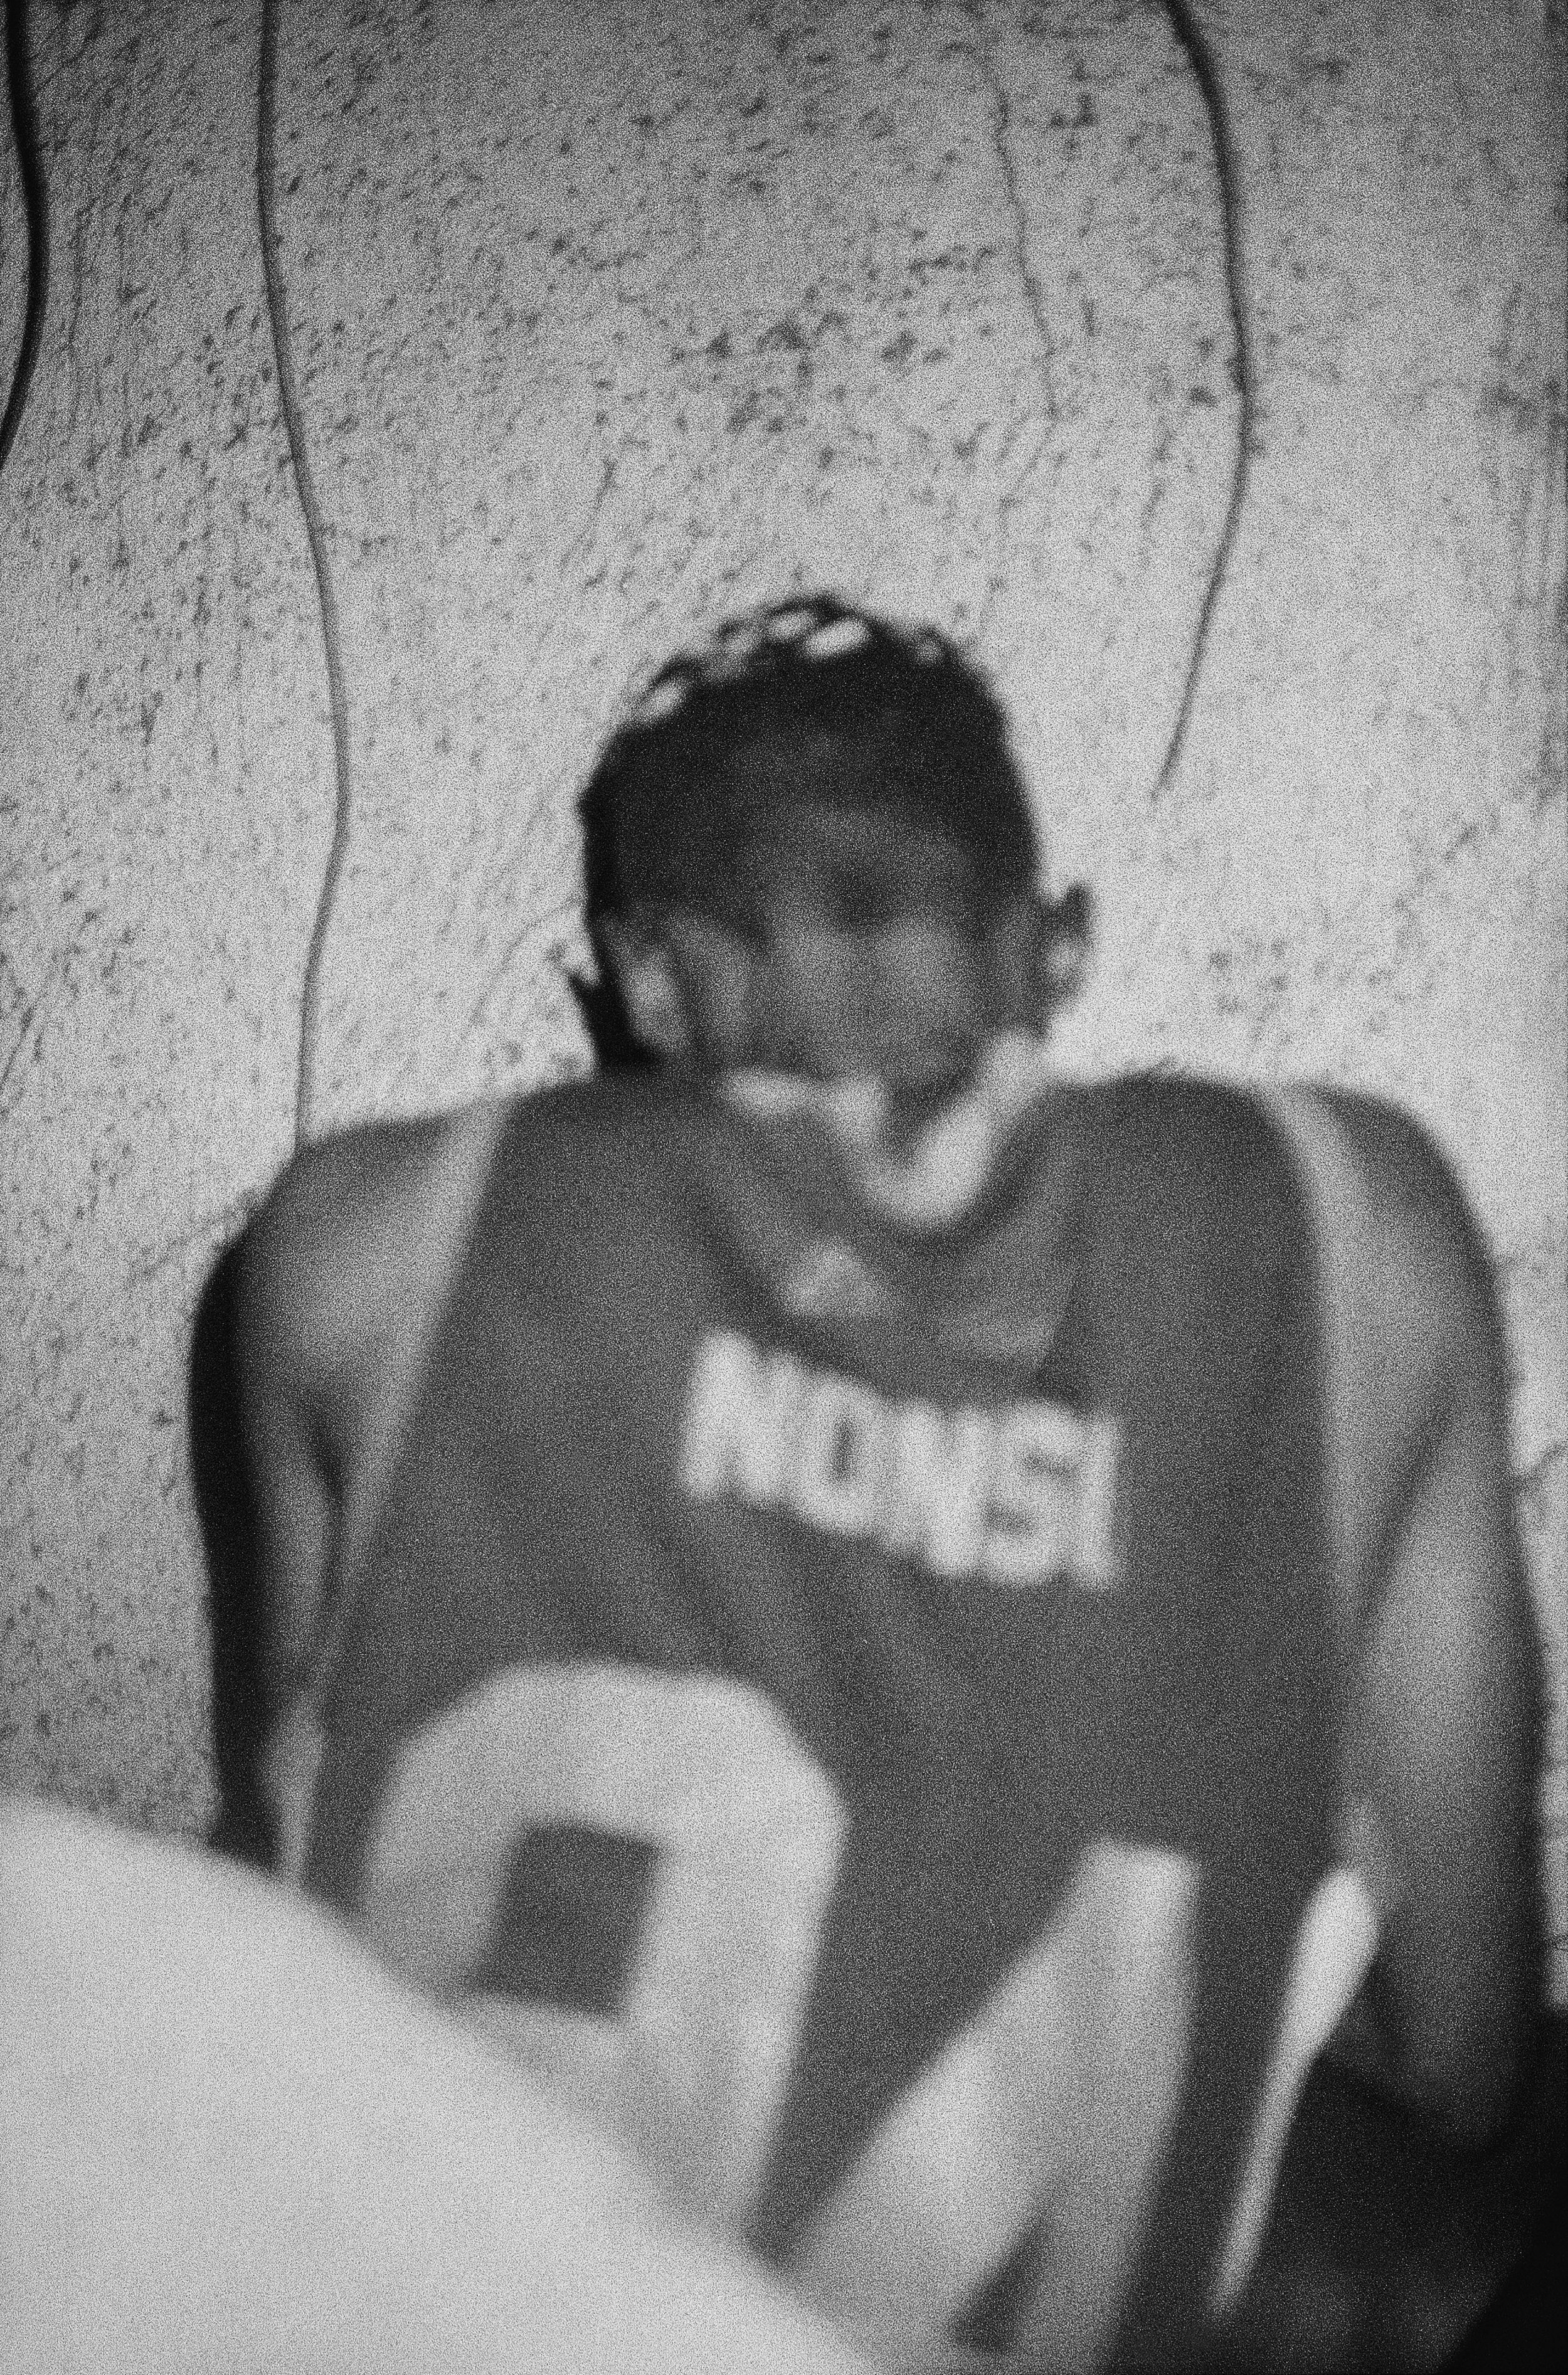 Nonso-before-his-birthday-party-2019-Hand-printed-silver-gelatin-print.jpeg